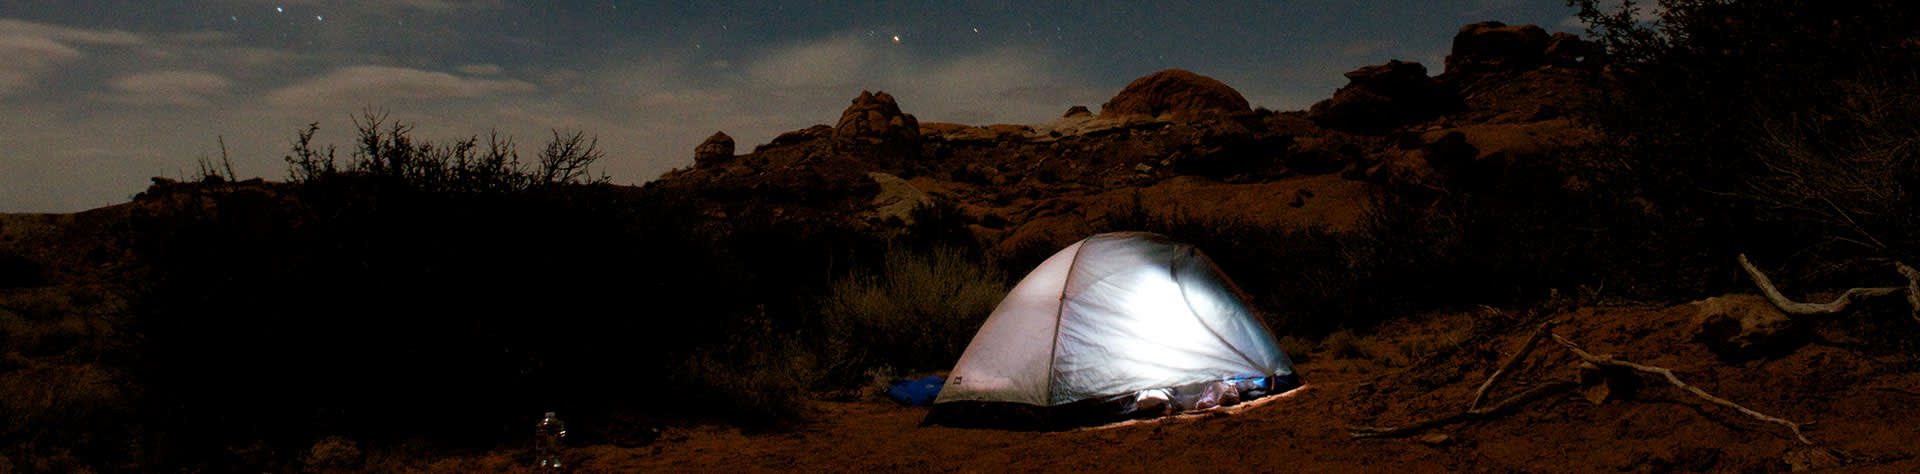 Camping with kids? Here's a handy checklist